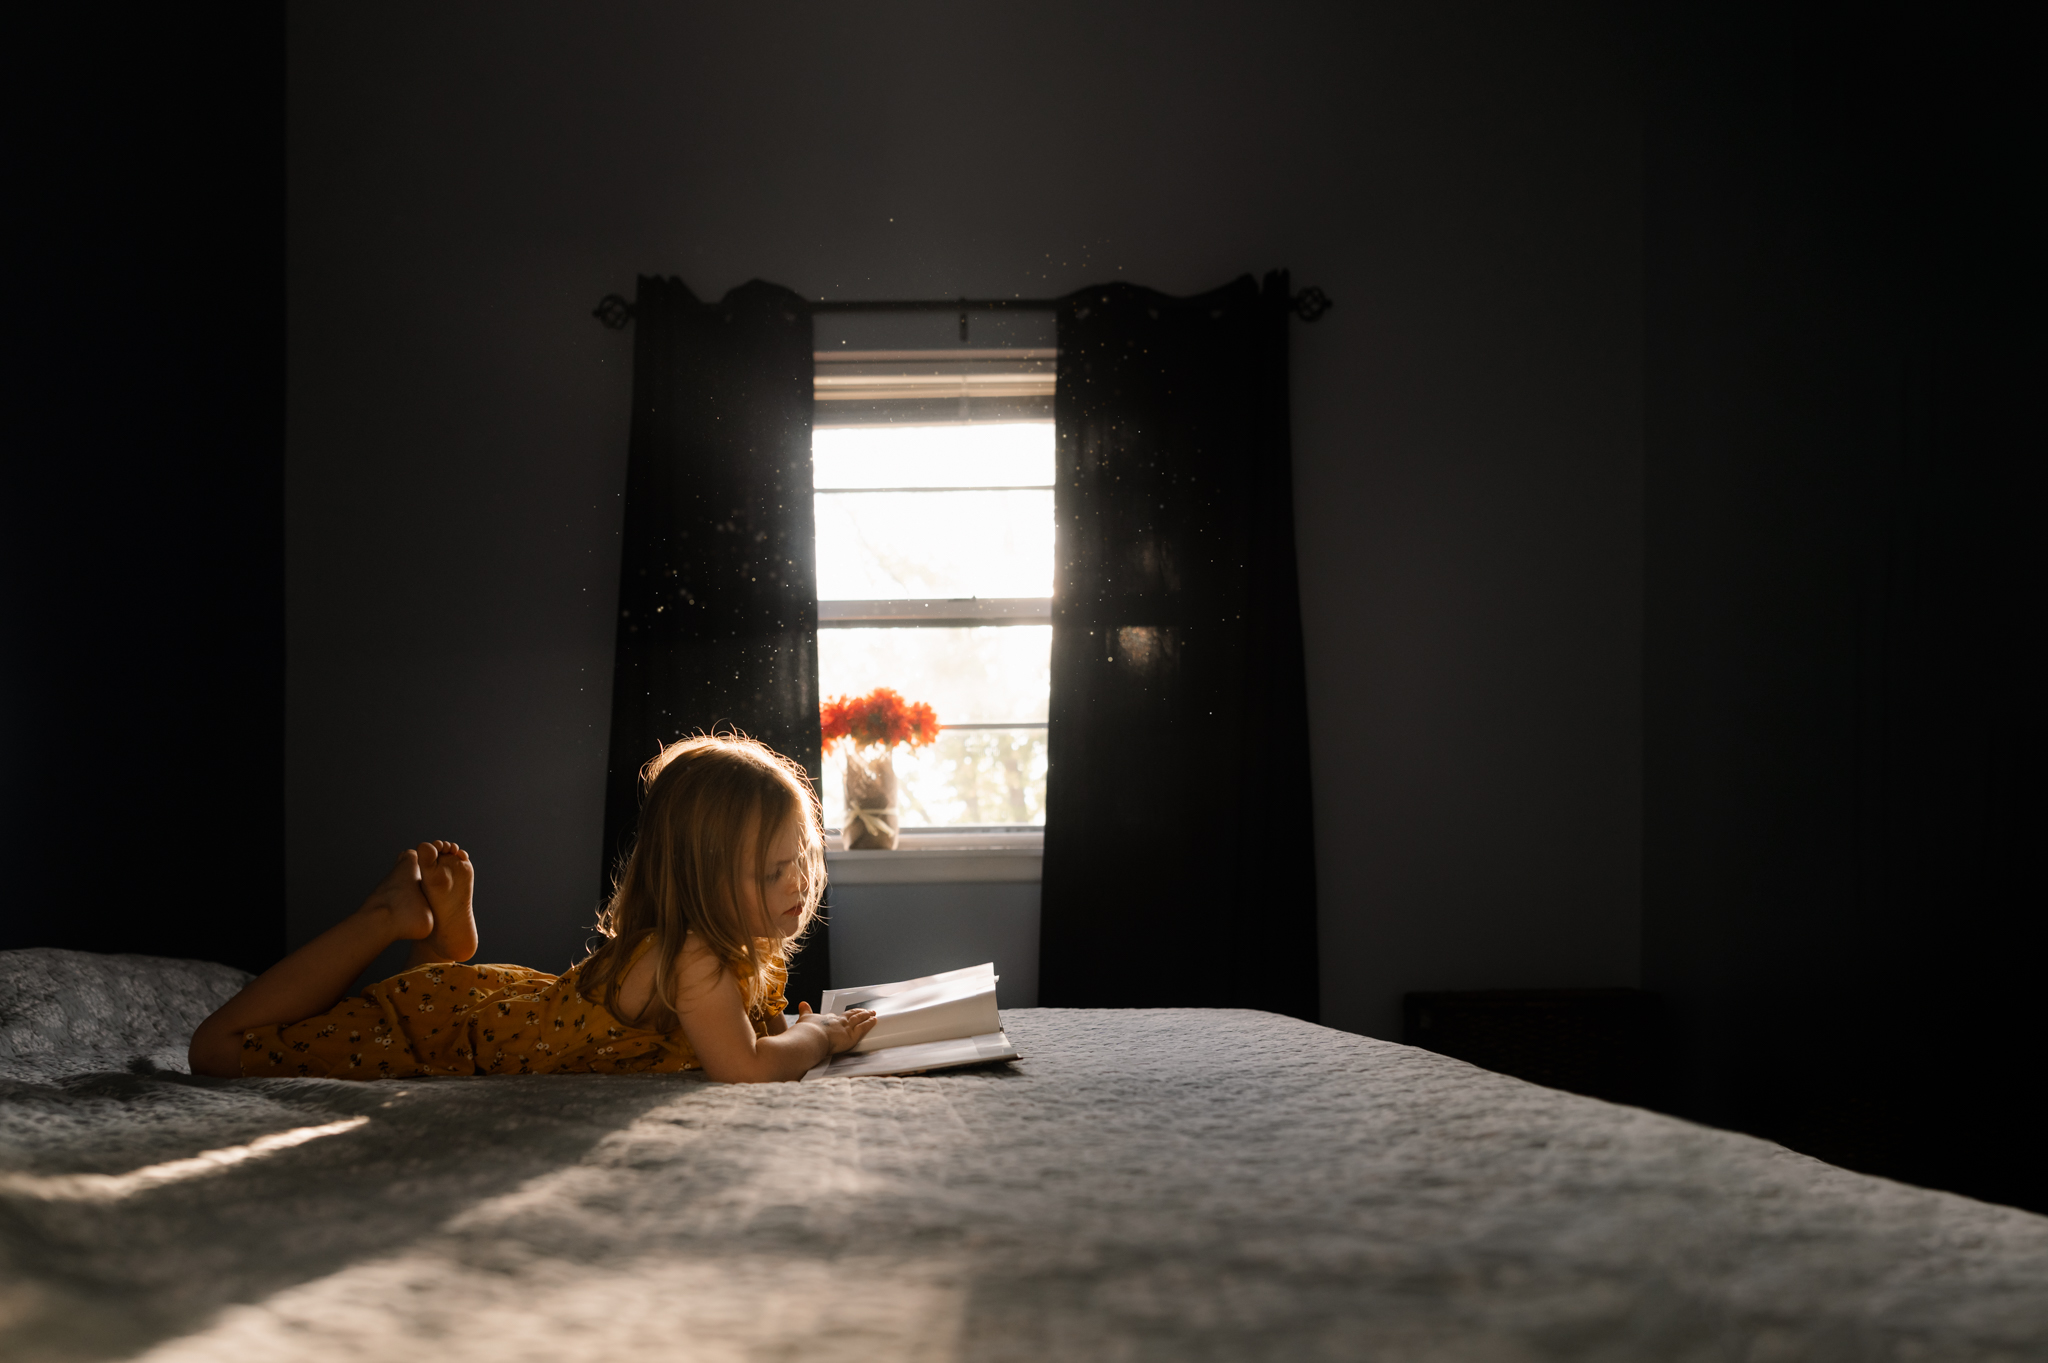 5 Spots in Your House to Capture Low Light Images - girl on bed